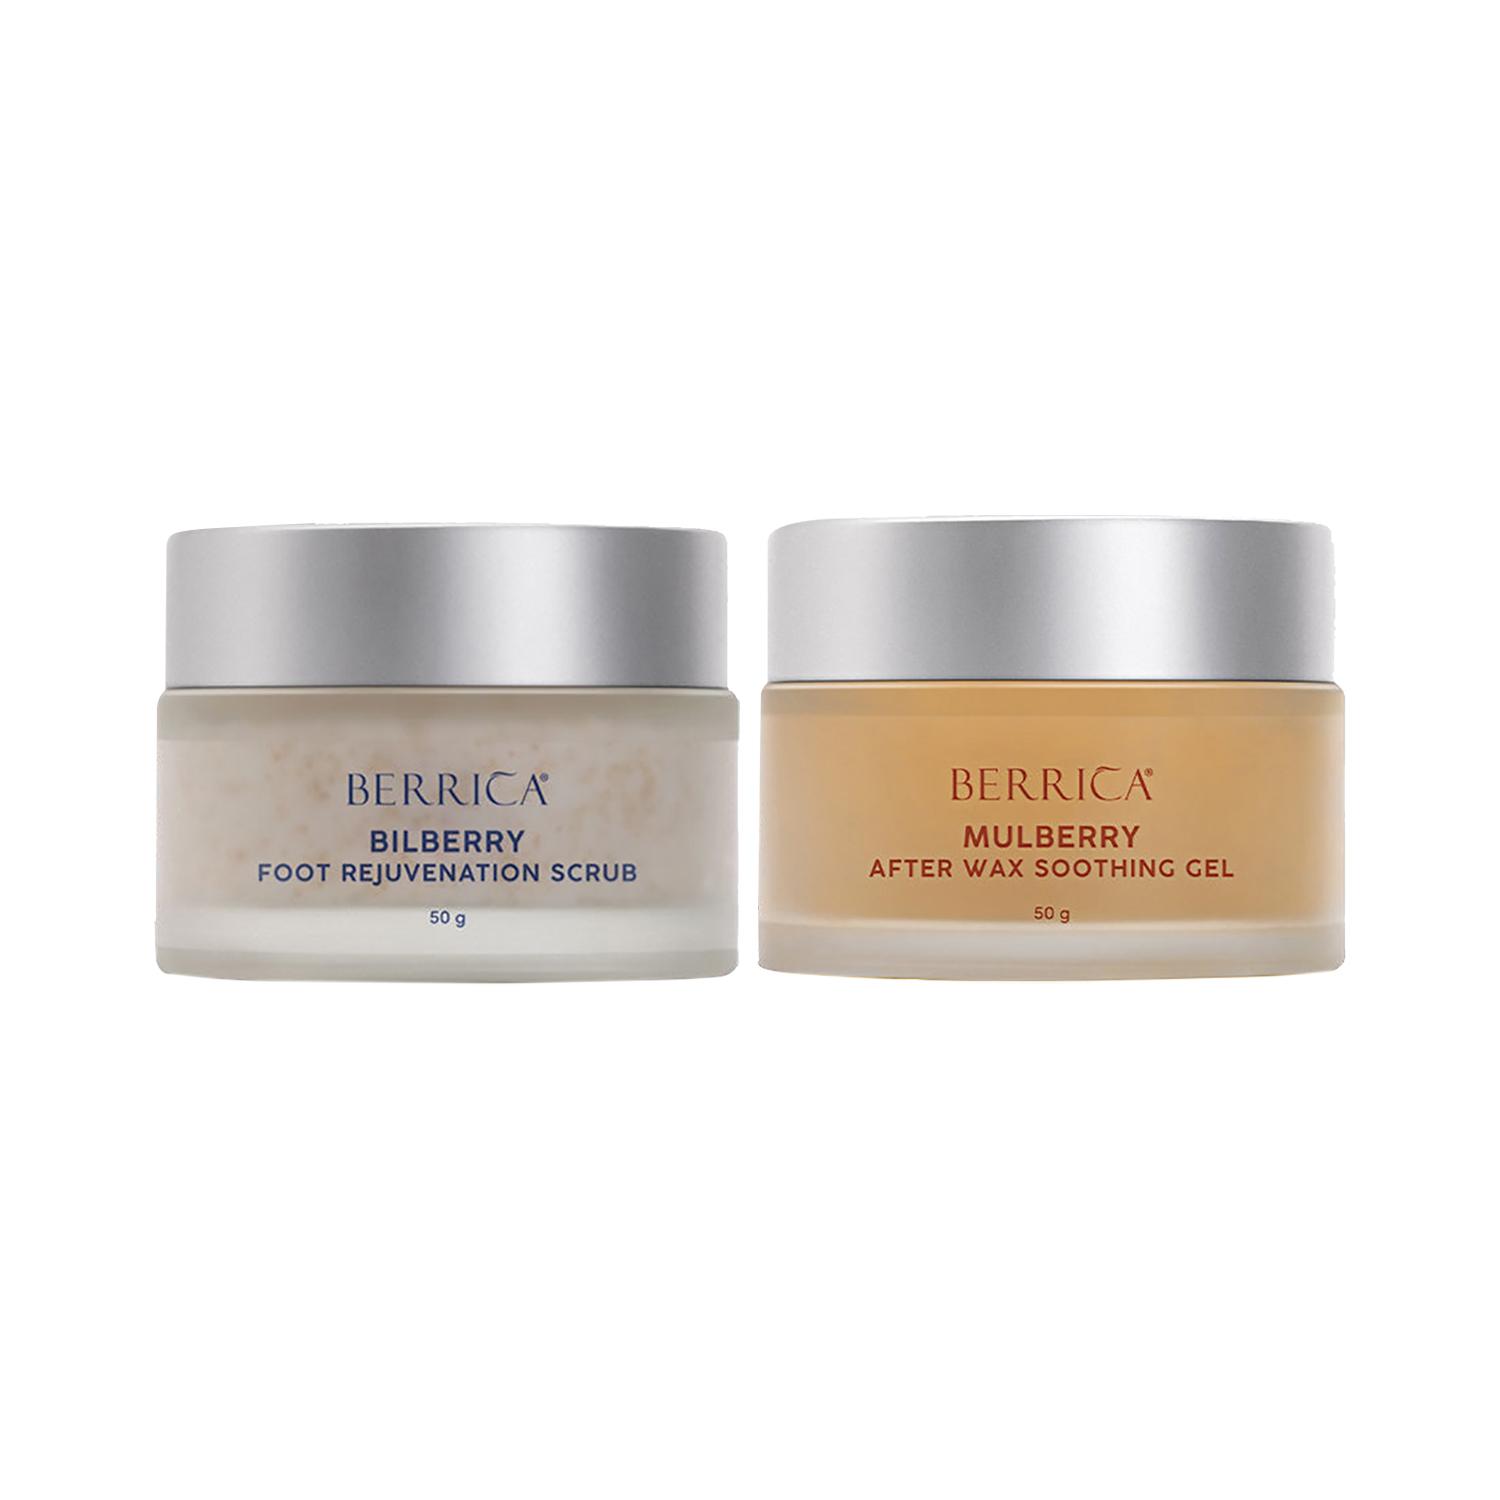 Berrica | Berrica Bilberry Foot Rejuvenation Scrub (50g) & Mulberry After Wax Soothing Gel (50g) Combo